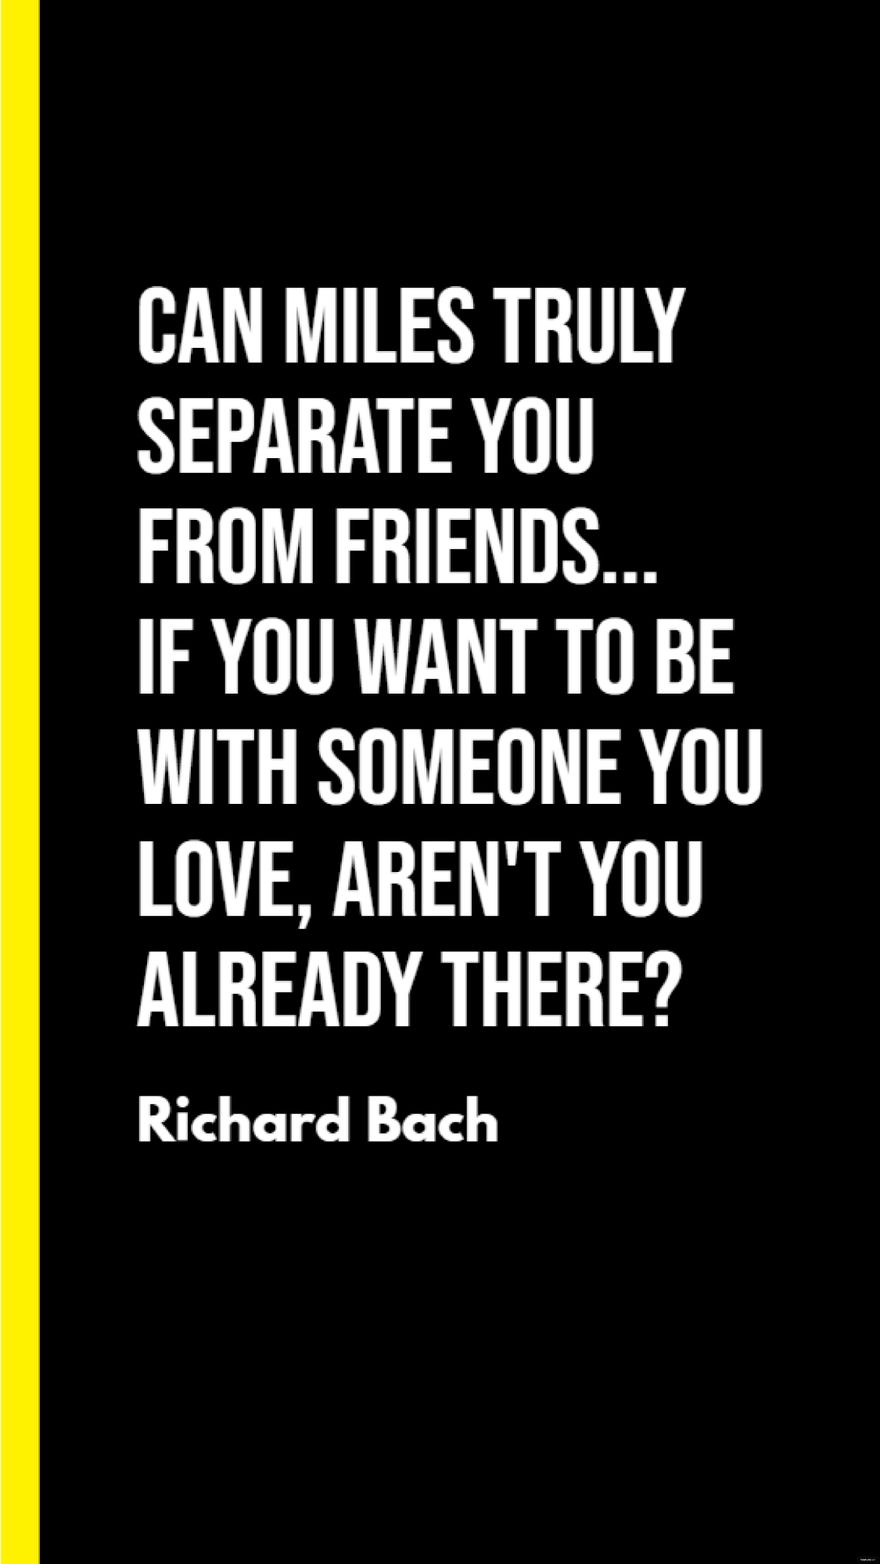 Richard Bach - Can miles truly separate you from friends... If you want to be with someone you love, aren't you already there?